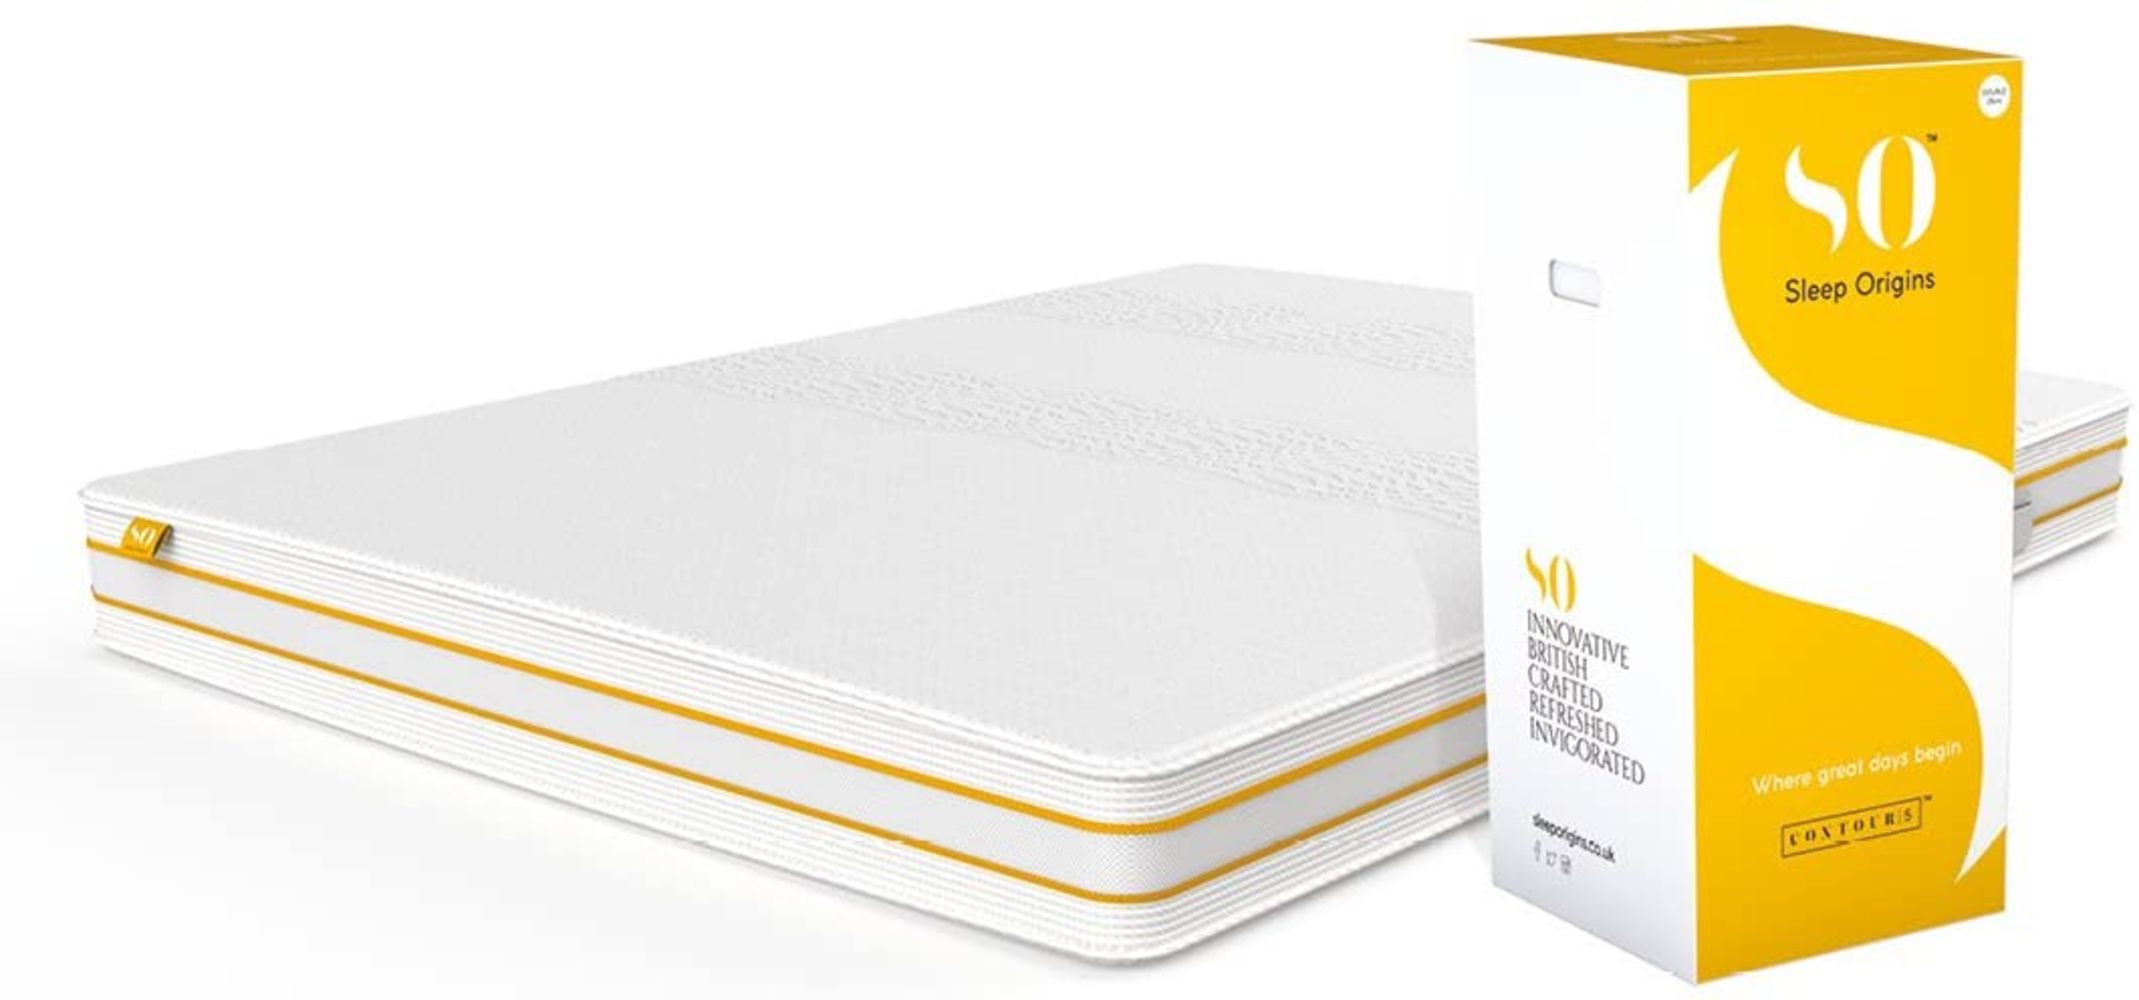 New Sleep Origins Mattresses, rolled and boxed, various sizes and thicknesses